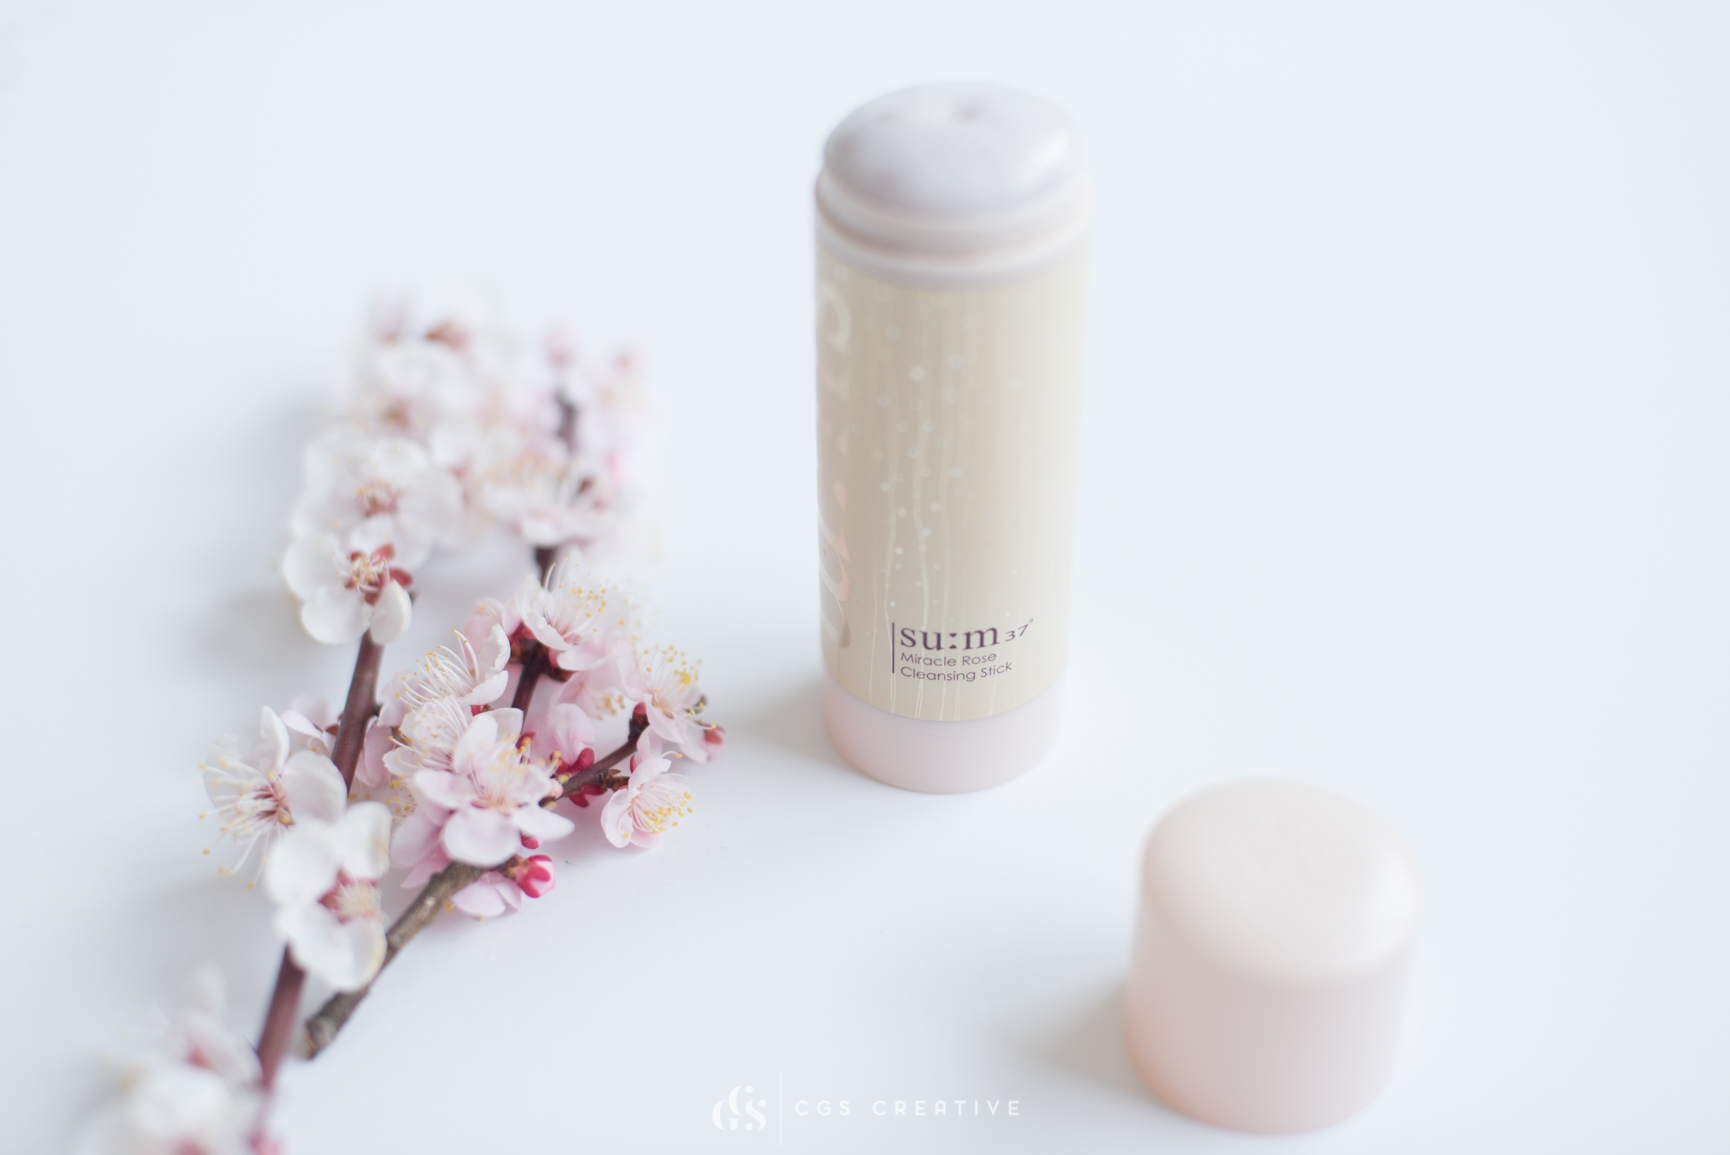 SUM-37 Miracle Rose Cleansing Stick Korean Beauty Review by Roxy Hutton CGScreative (4 of 7).JPG